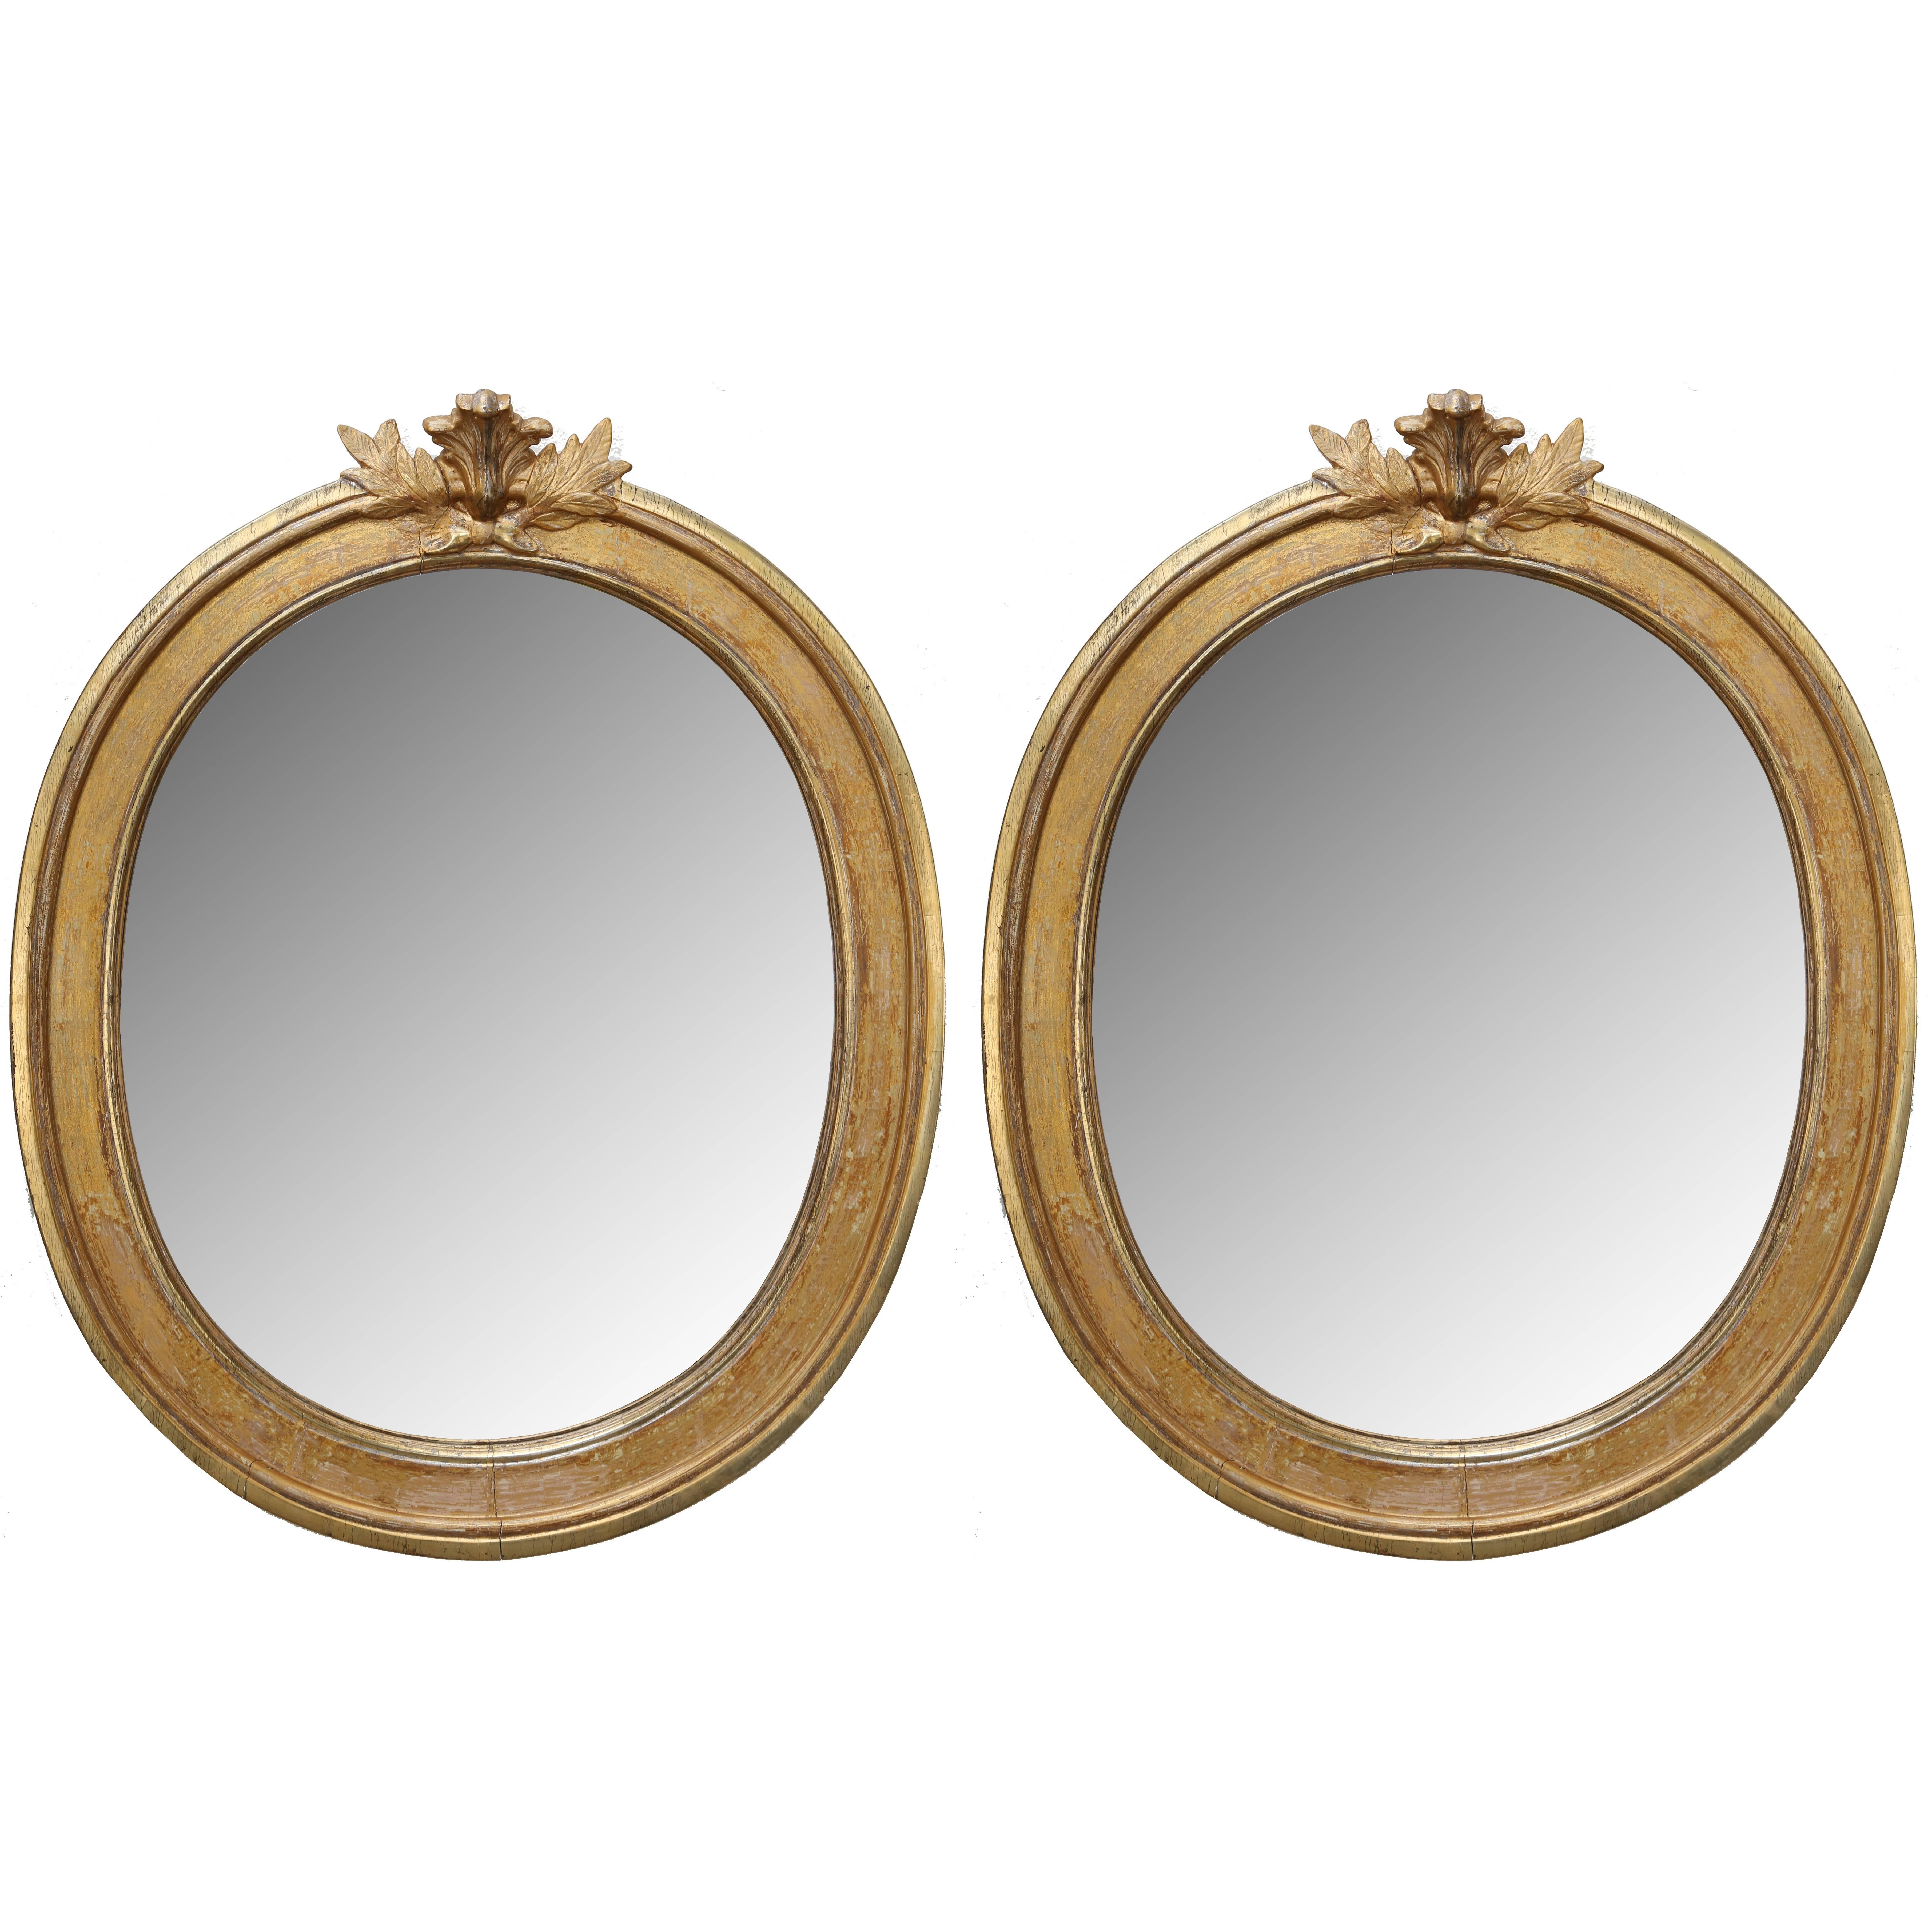 Pair of Antique Swedish Late Gustavian Giltwood Mirrors, Early 19th Century For Sale